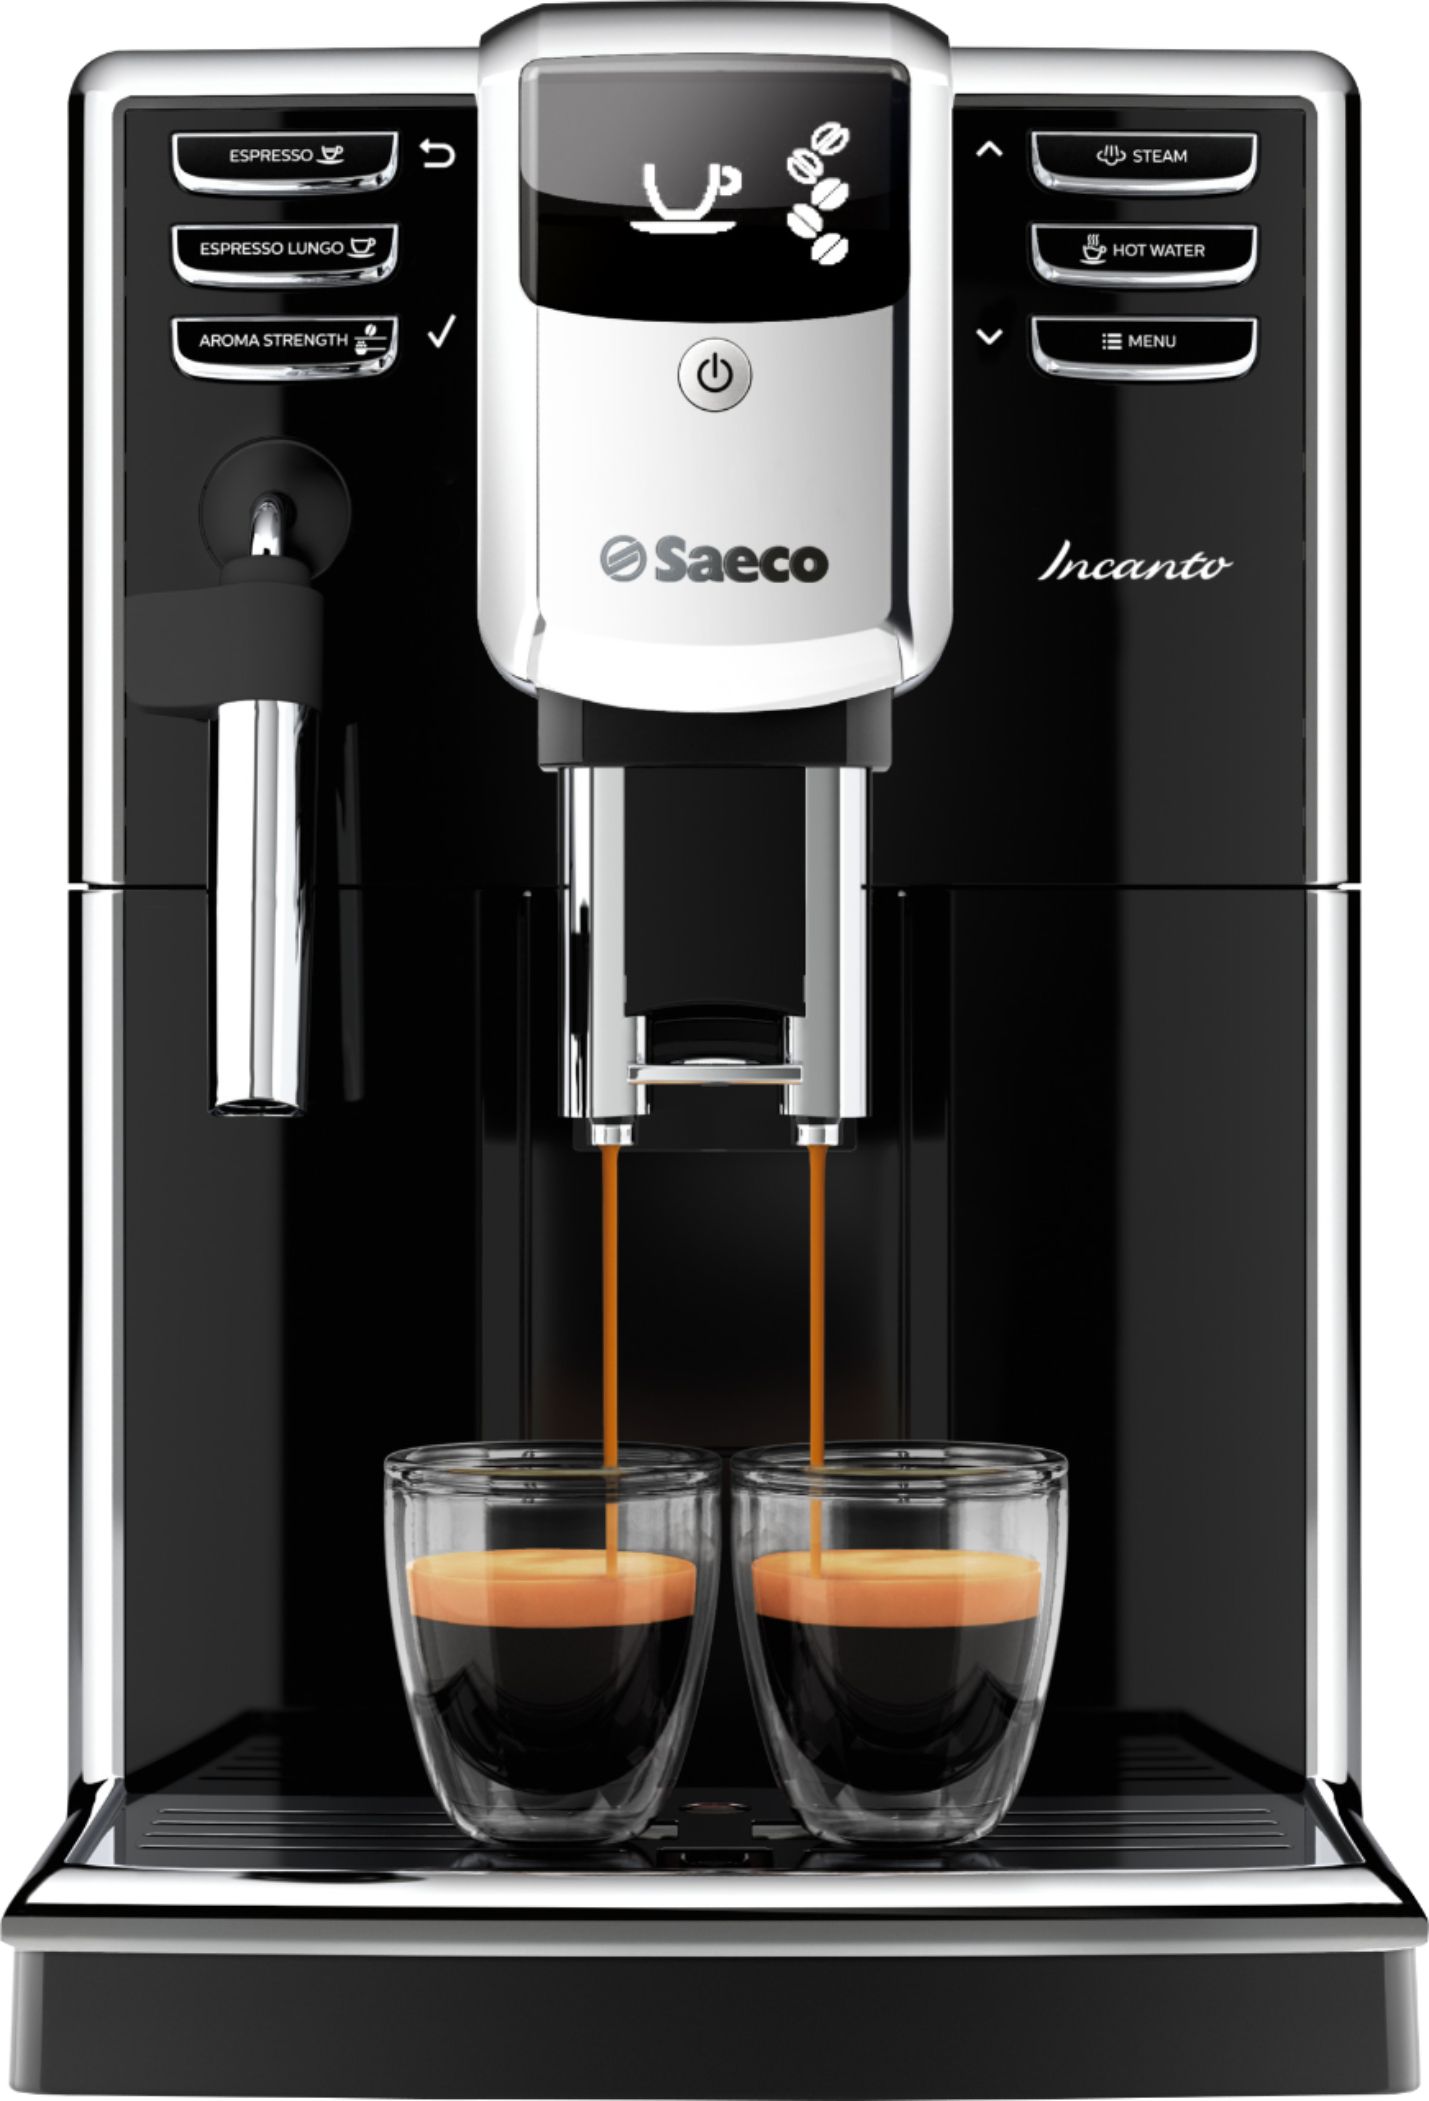 Buy: Saeco Incanto Espresso Machine with 15 bars of Frother and intergrated grinder Black HD8911/48